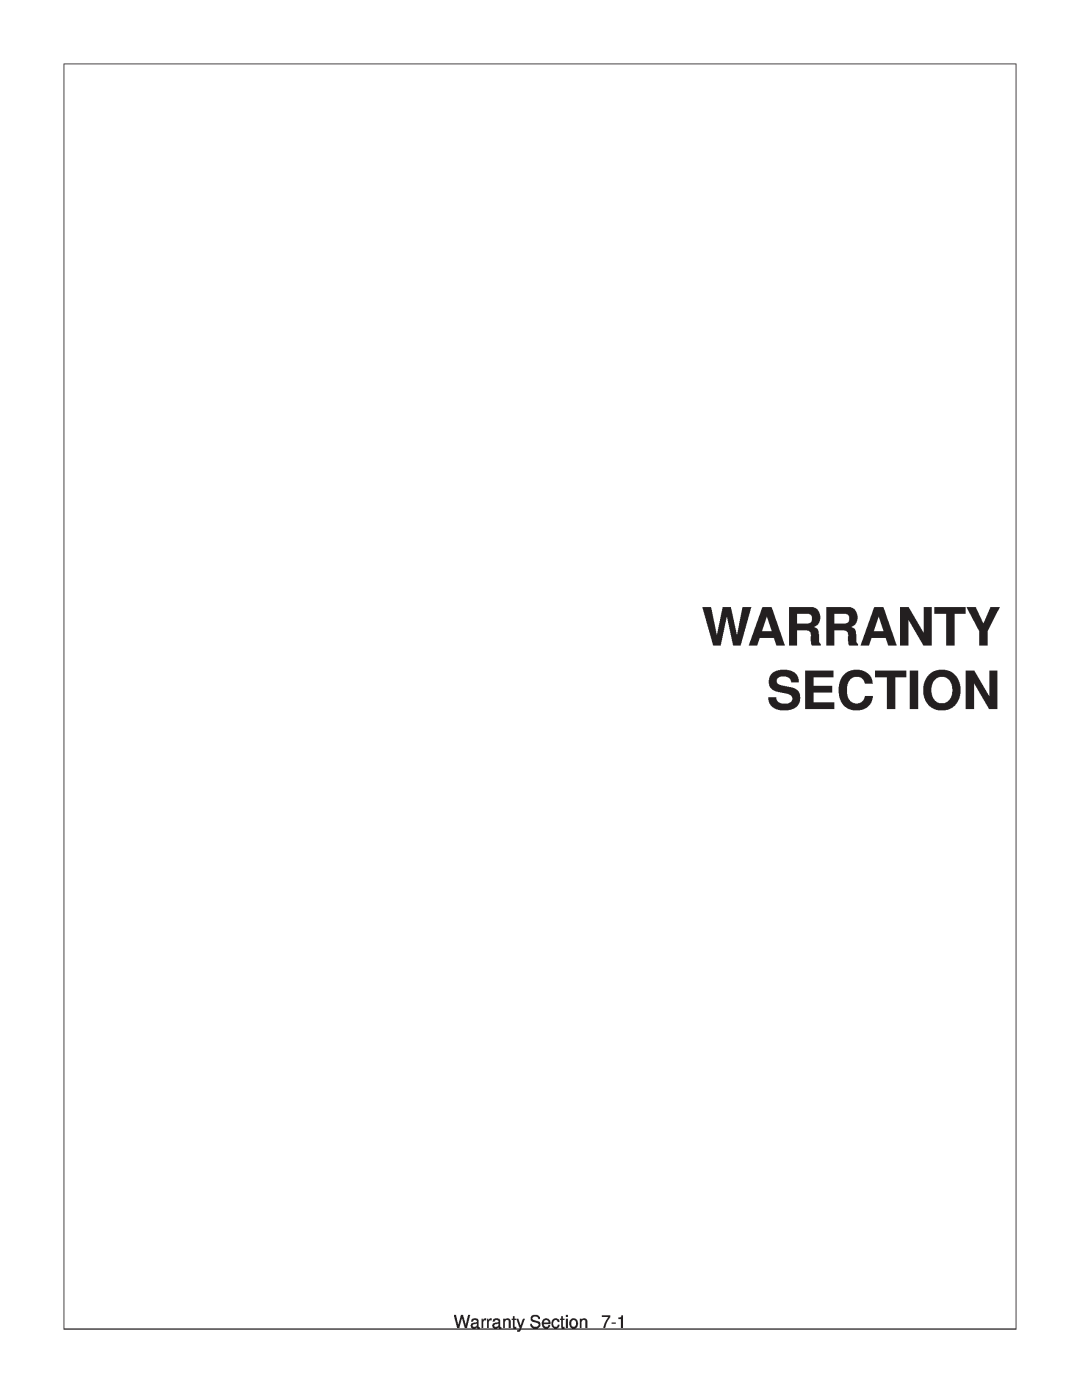 Tiger Products Co., Ltd JD 72-7520 manual Warranty Section 